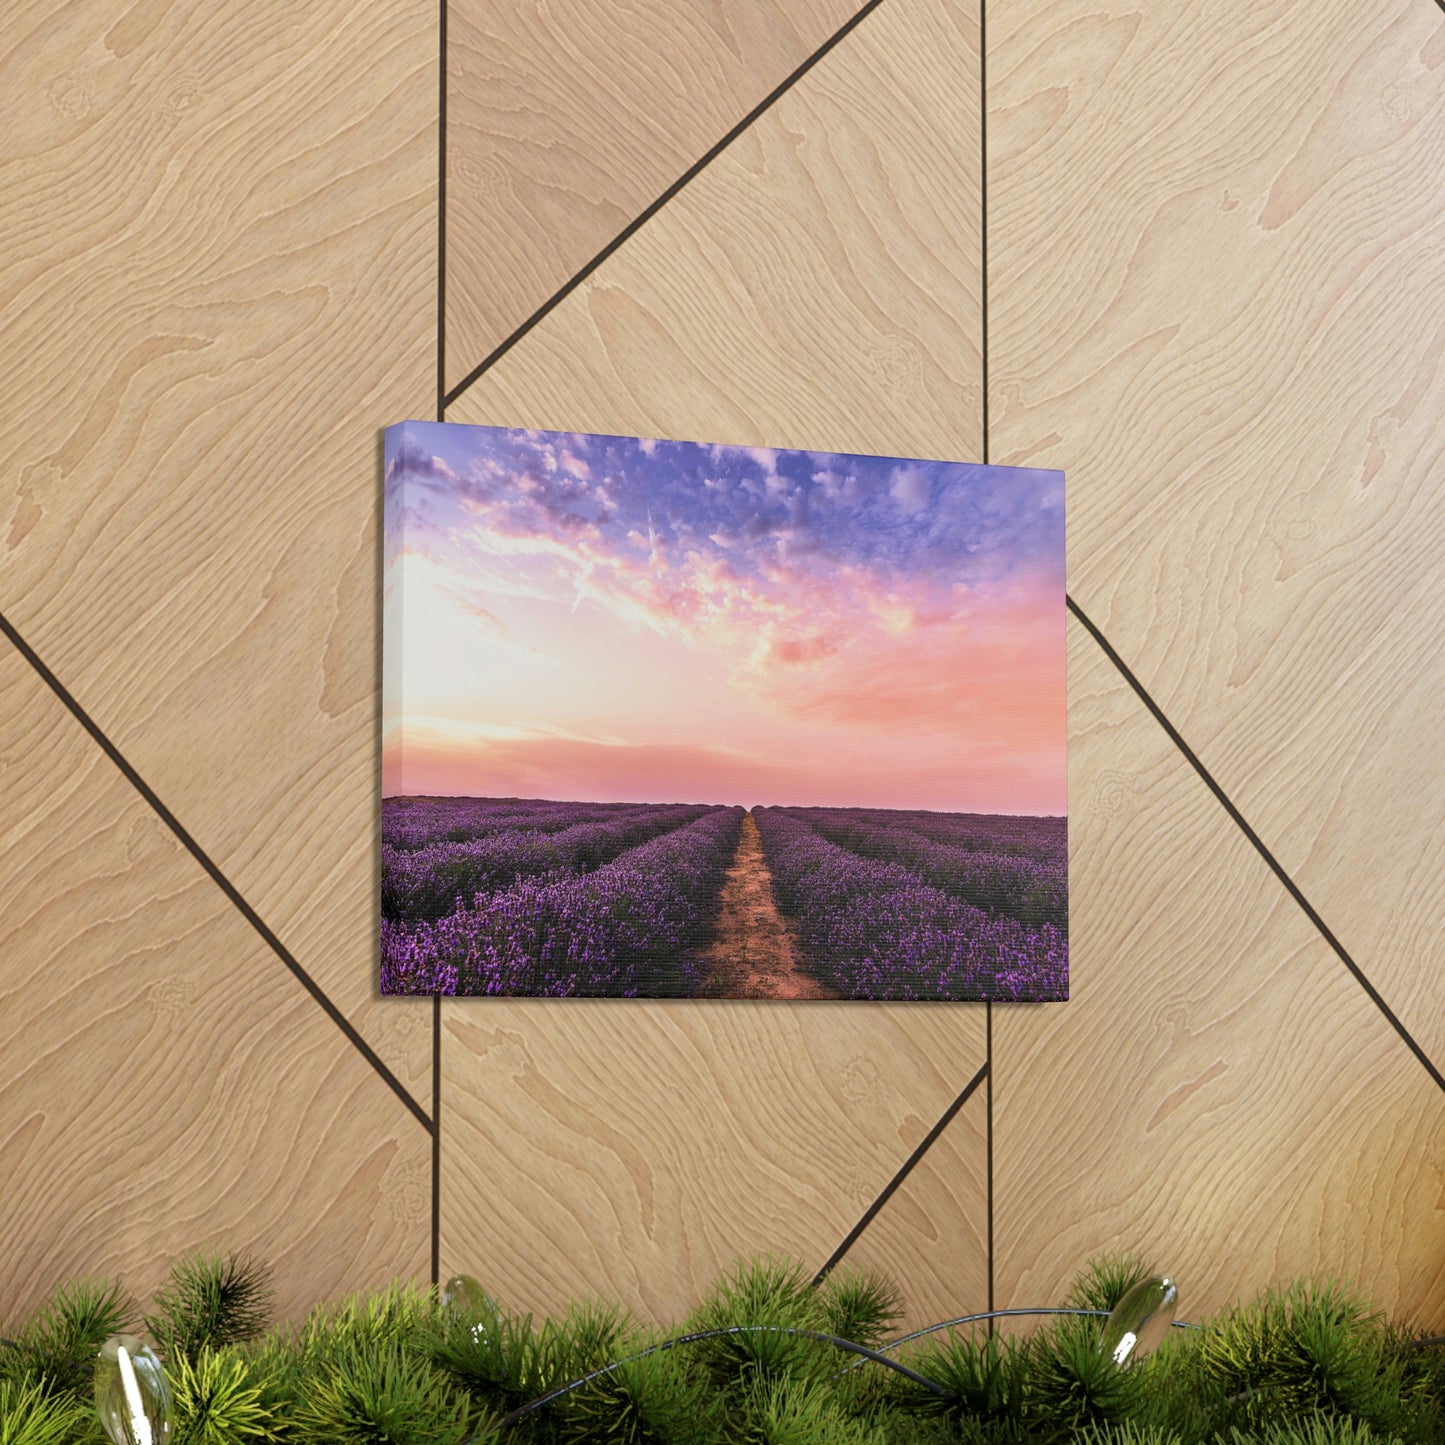 Field Of Lavender Flowers Under A Pink Sunset Sky Canvas Wall Art